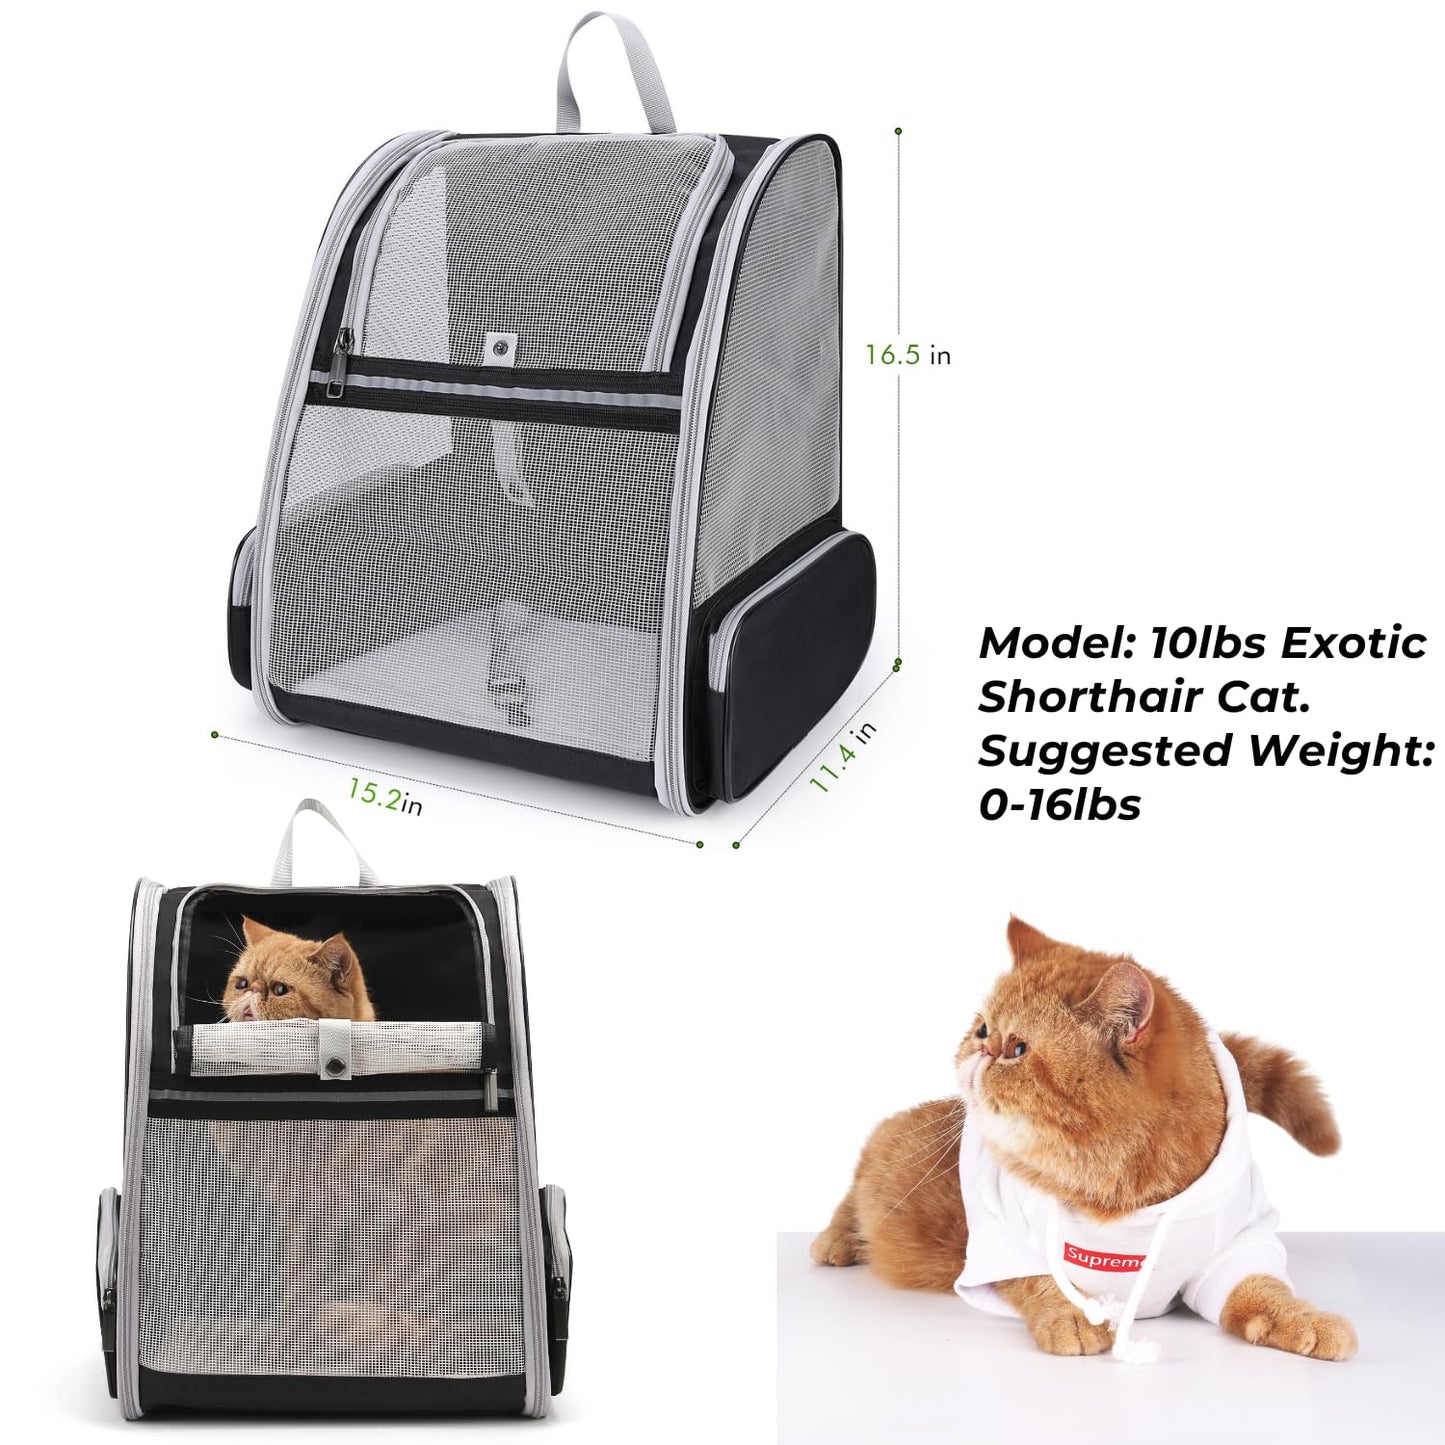 Lollimeow Cat Backpack Carrier, Ideal for Small Animals & Puppies, Outdoor Adventures, Vet Transport. Fully Ventilated Design for Ultimate Comfort On-The-Go